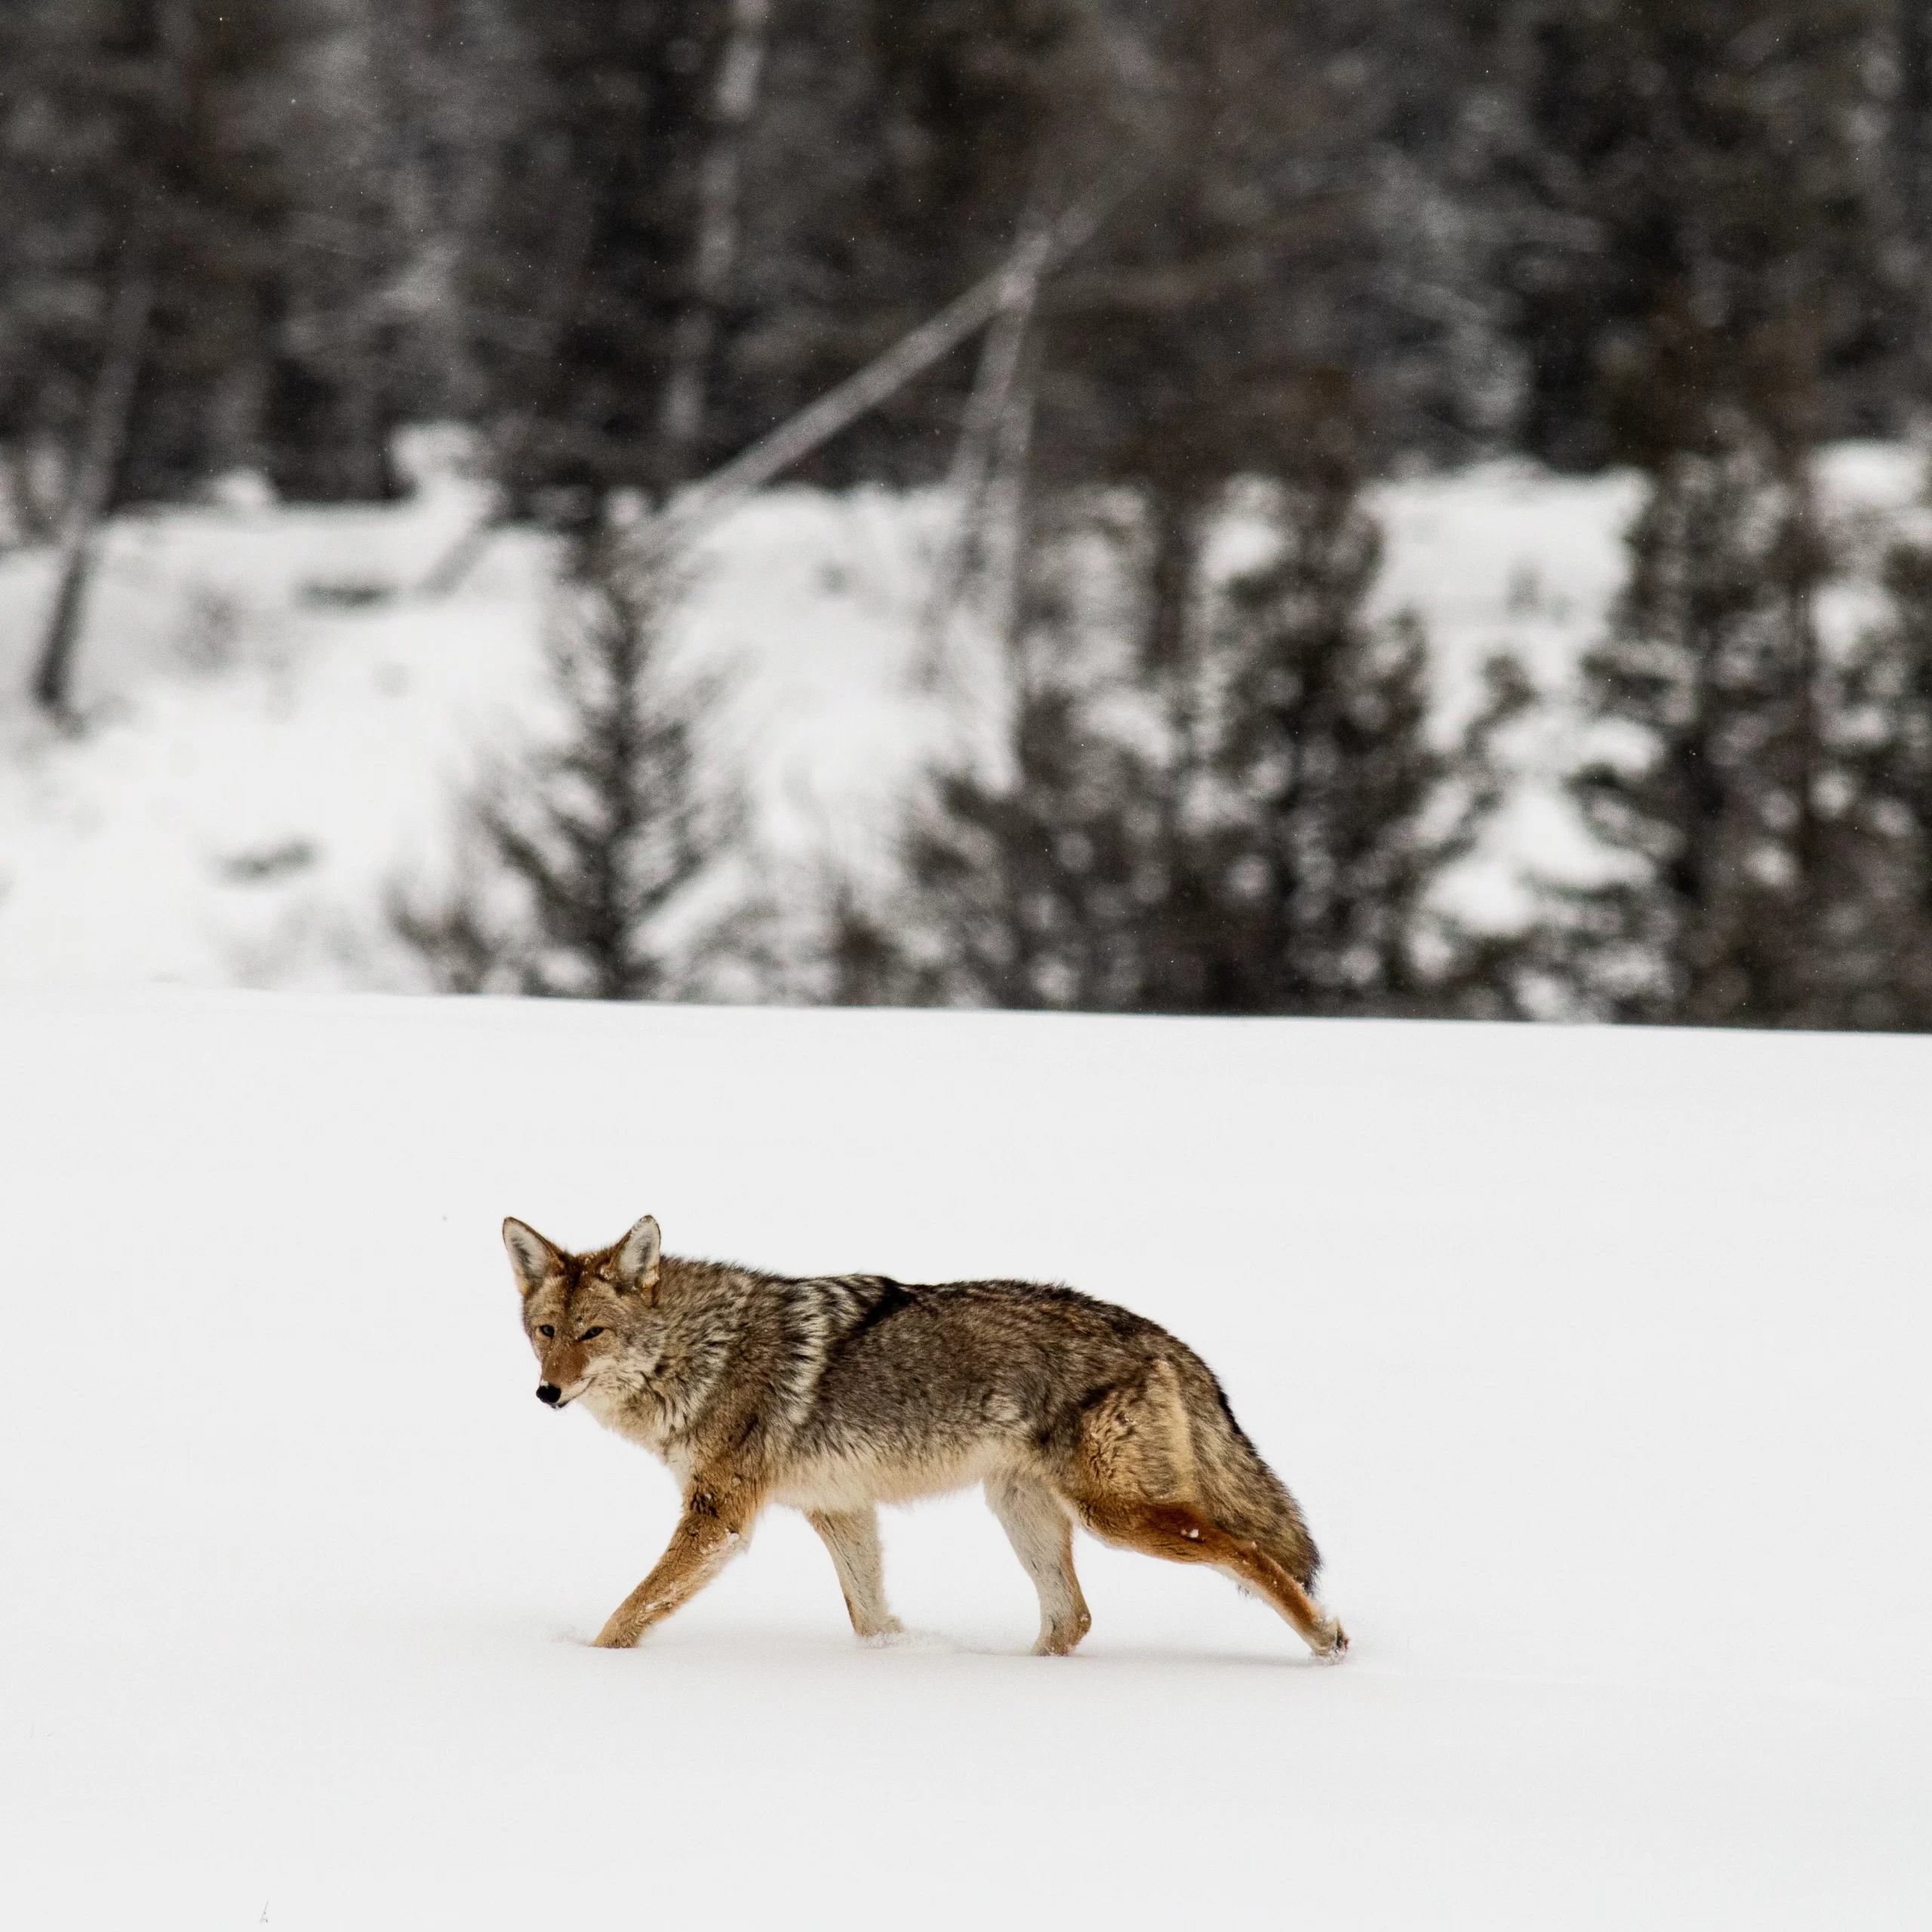 Yellowstone National Park, United States Published on January 23, 2020 Canon, EOS 70D Free to use under the Unsplash License A coyote trots through the snow at Yellowstone National Park.